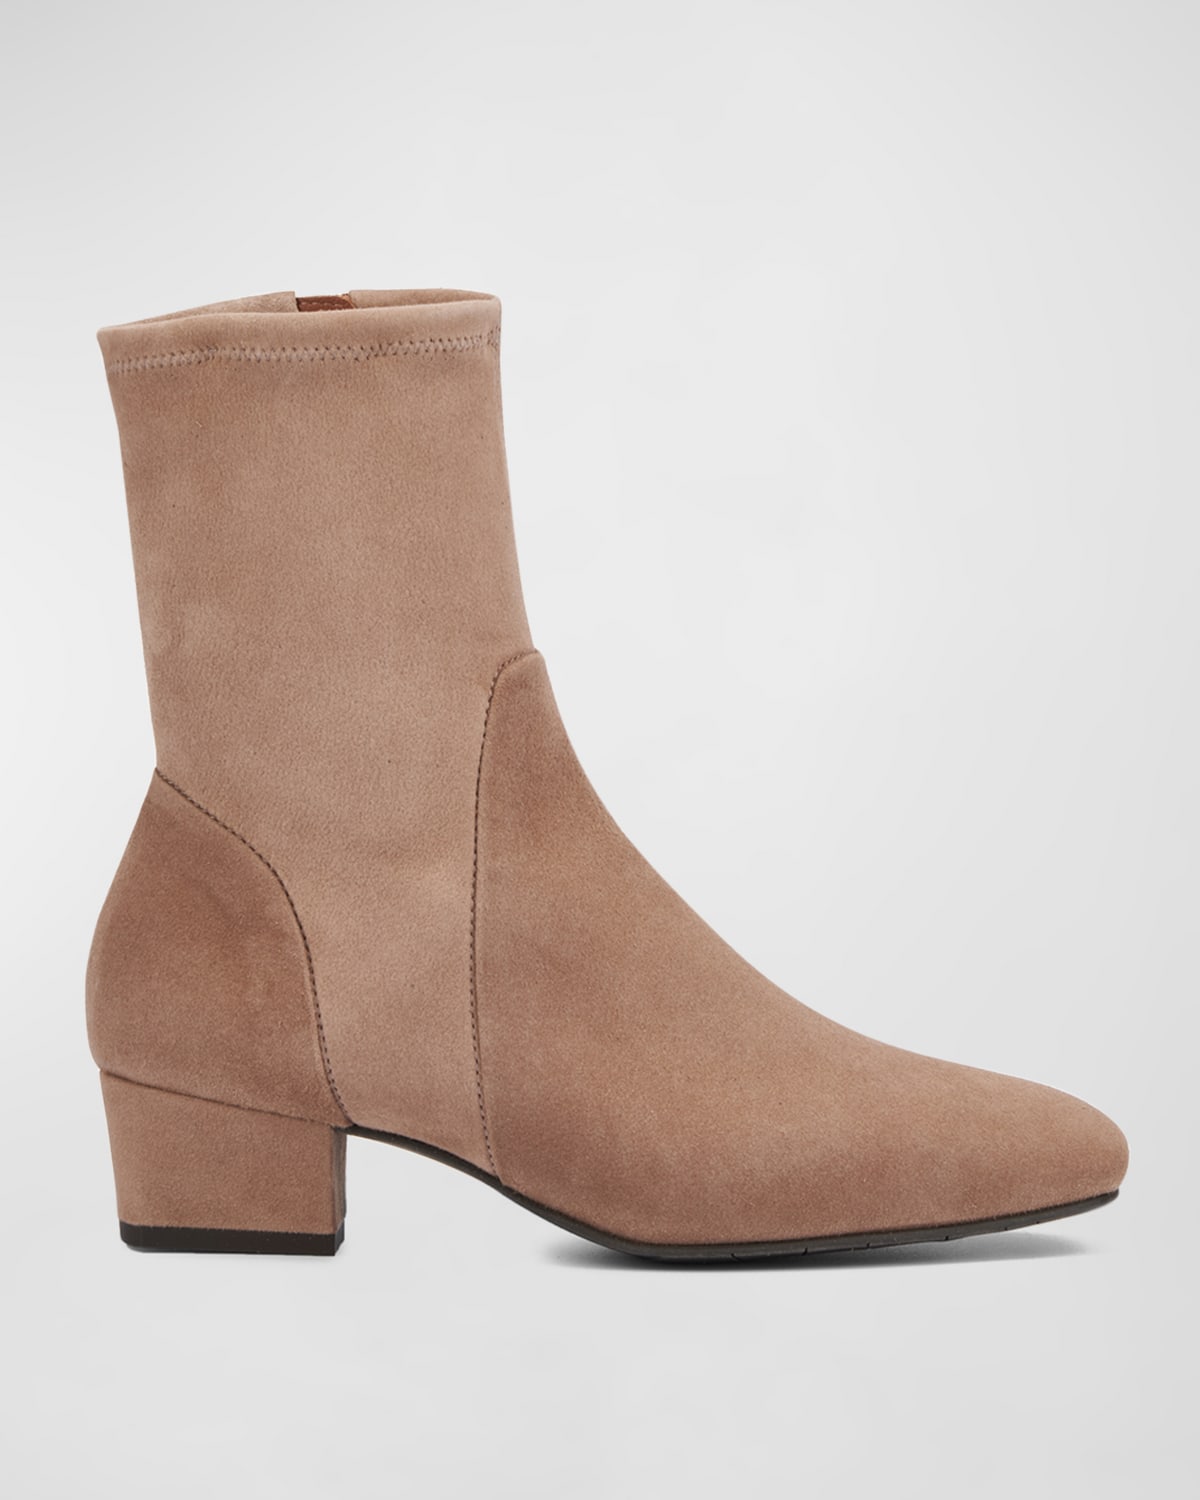 Aquatalia Stassi Stretch Suede Ankle Boots In Taupe